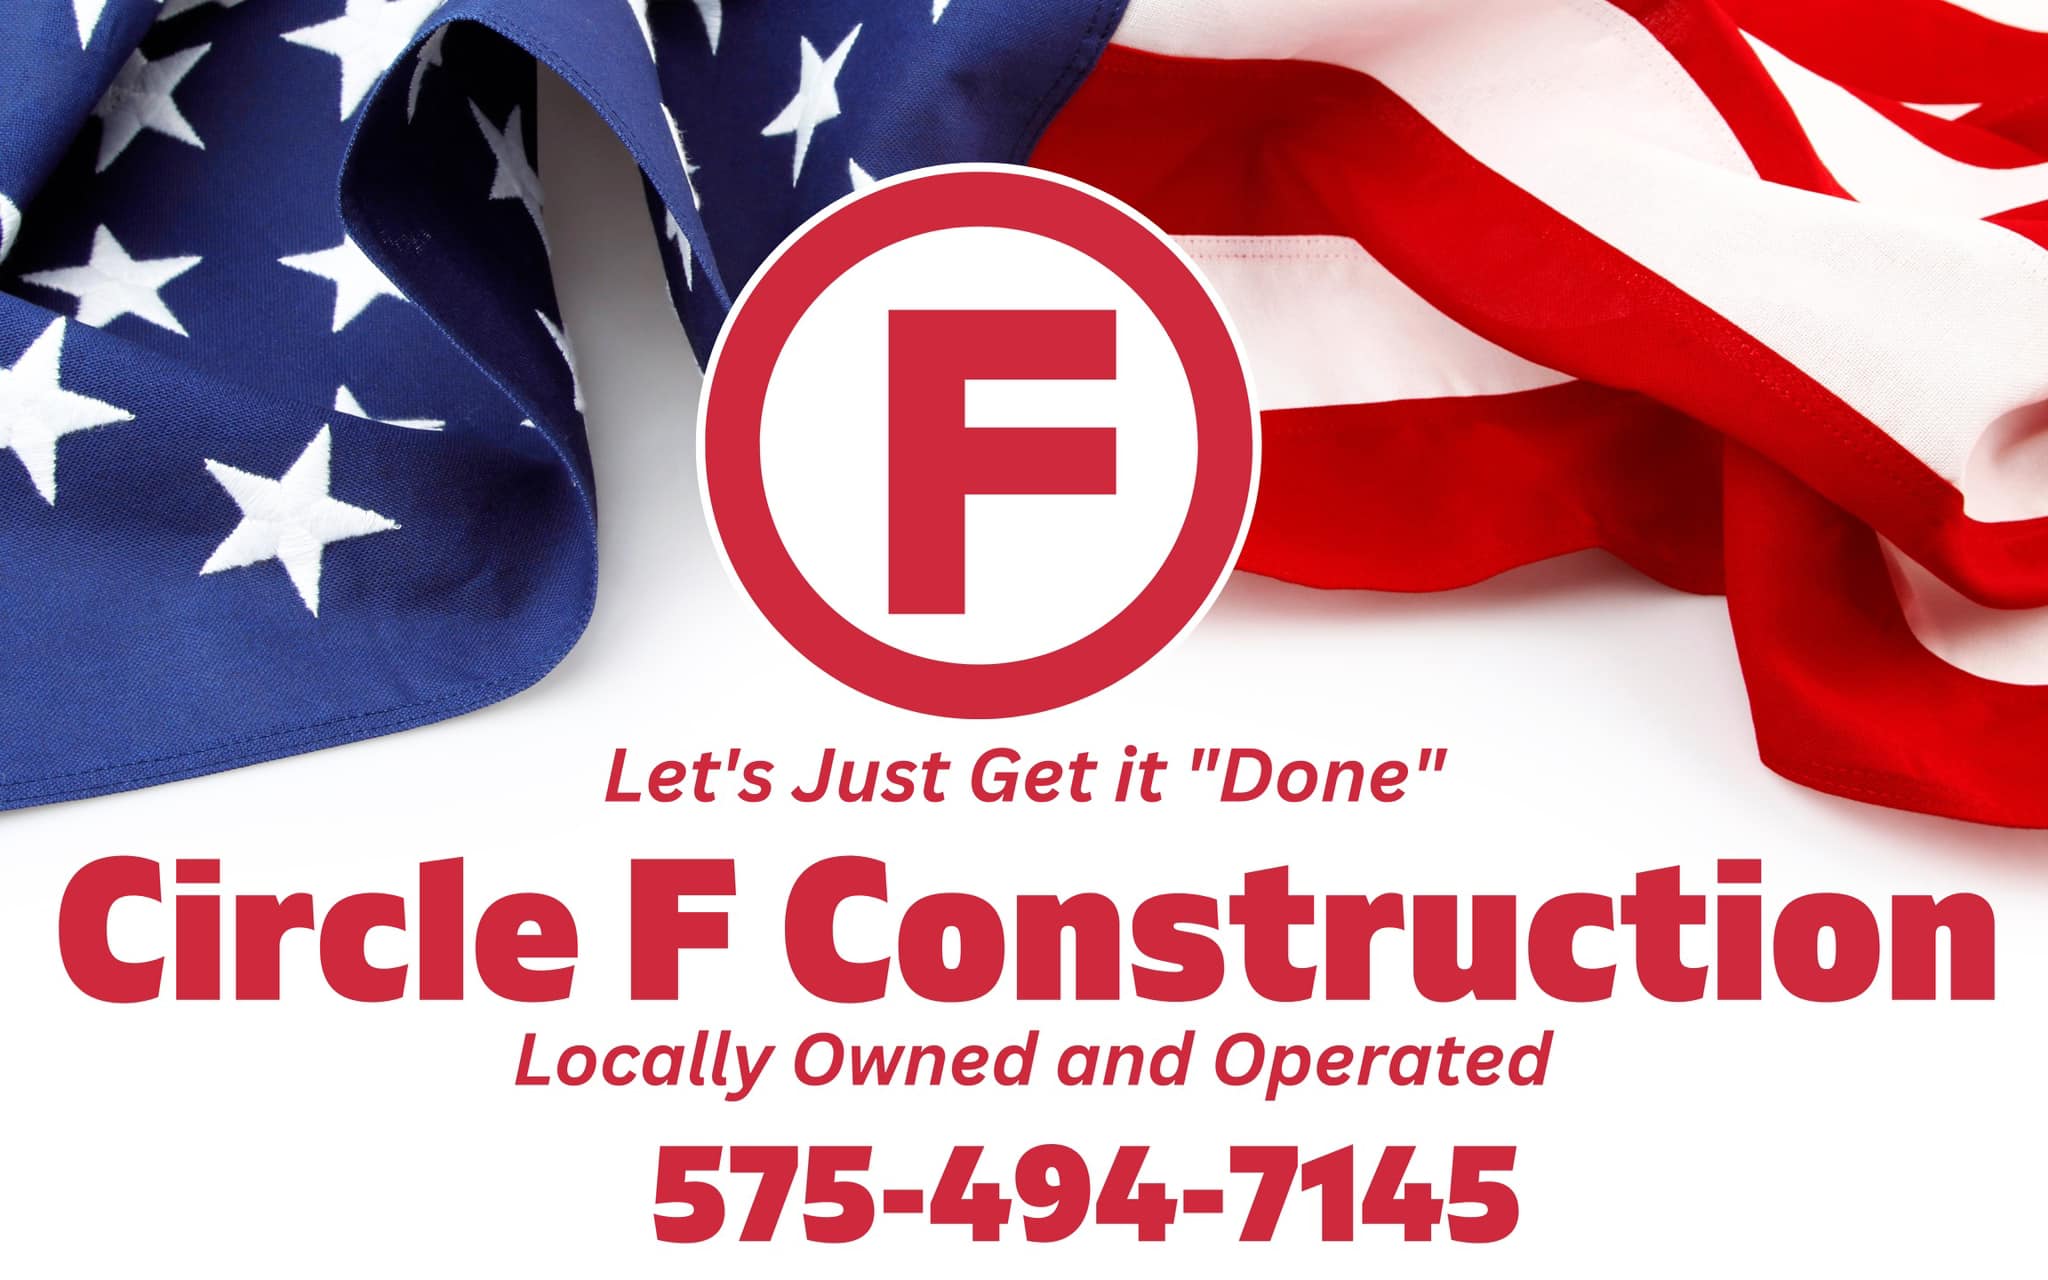 Circle F Construction 519 N Gold Ave, Deming New Mexico 88030